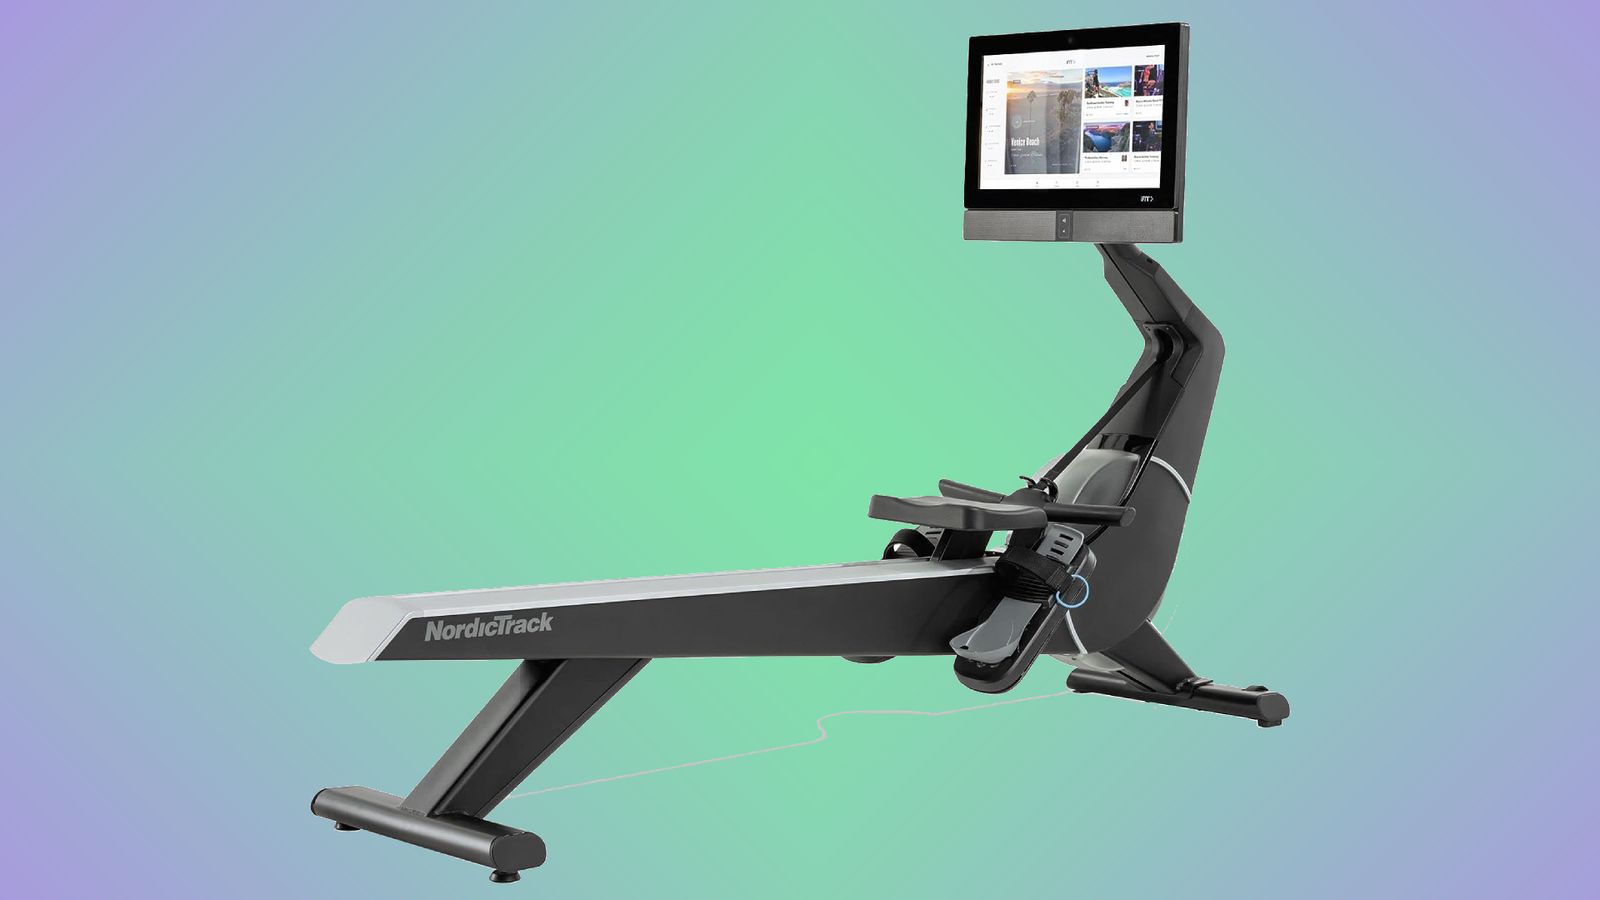 NordicTrack RW900 product image of a grey and black rowing machine with a large HD display.